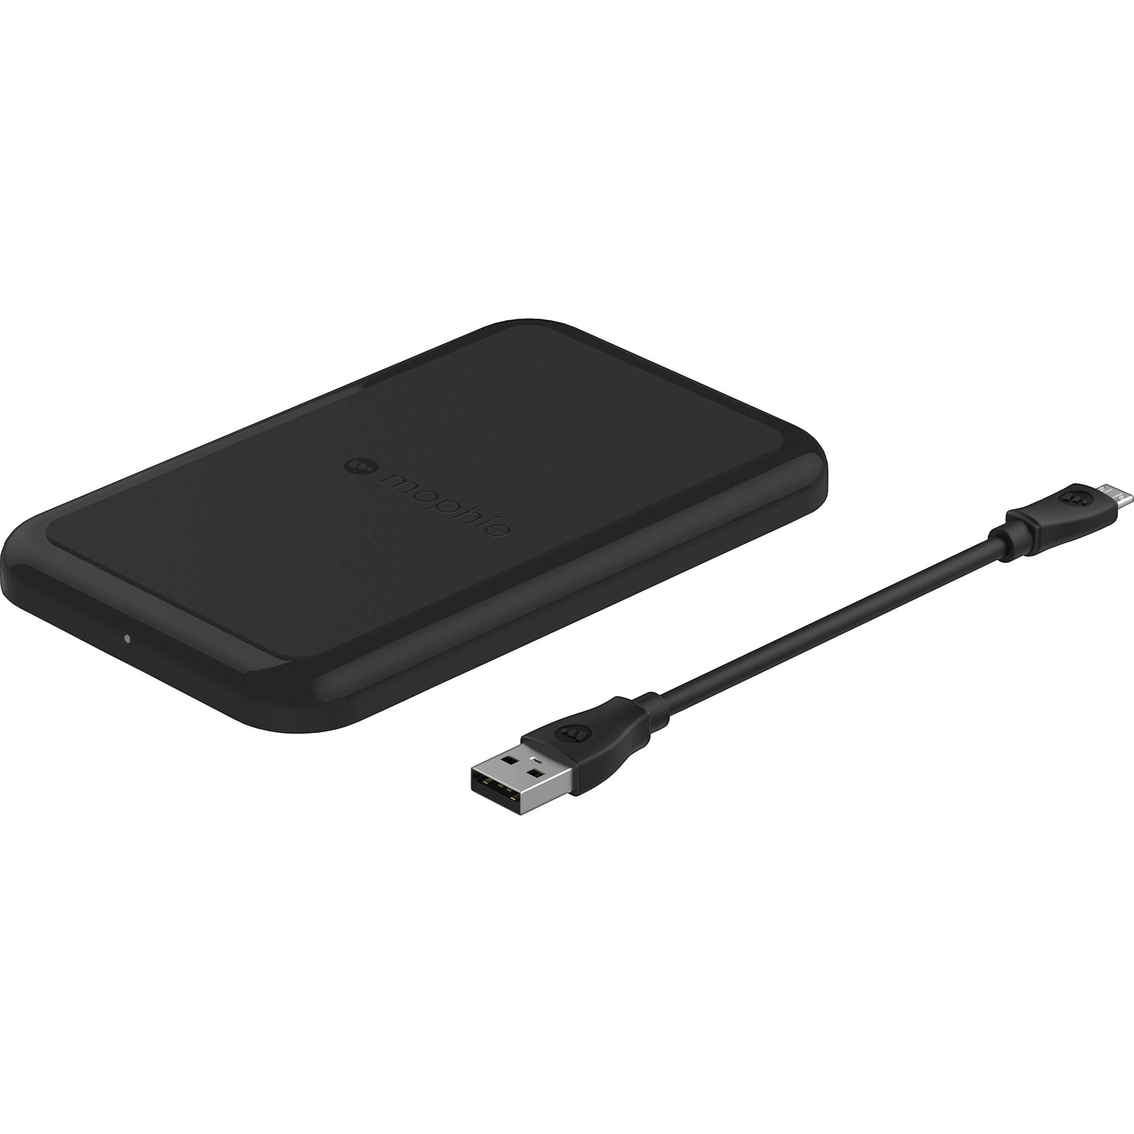 mophie Wireless Charging Base - Image 2 of 4